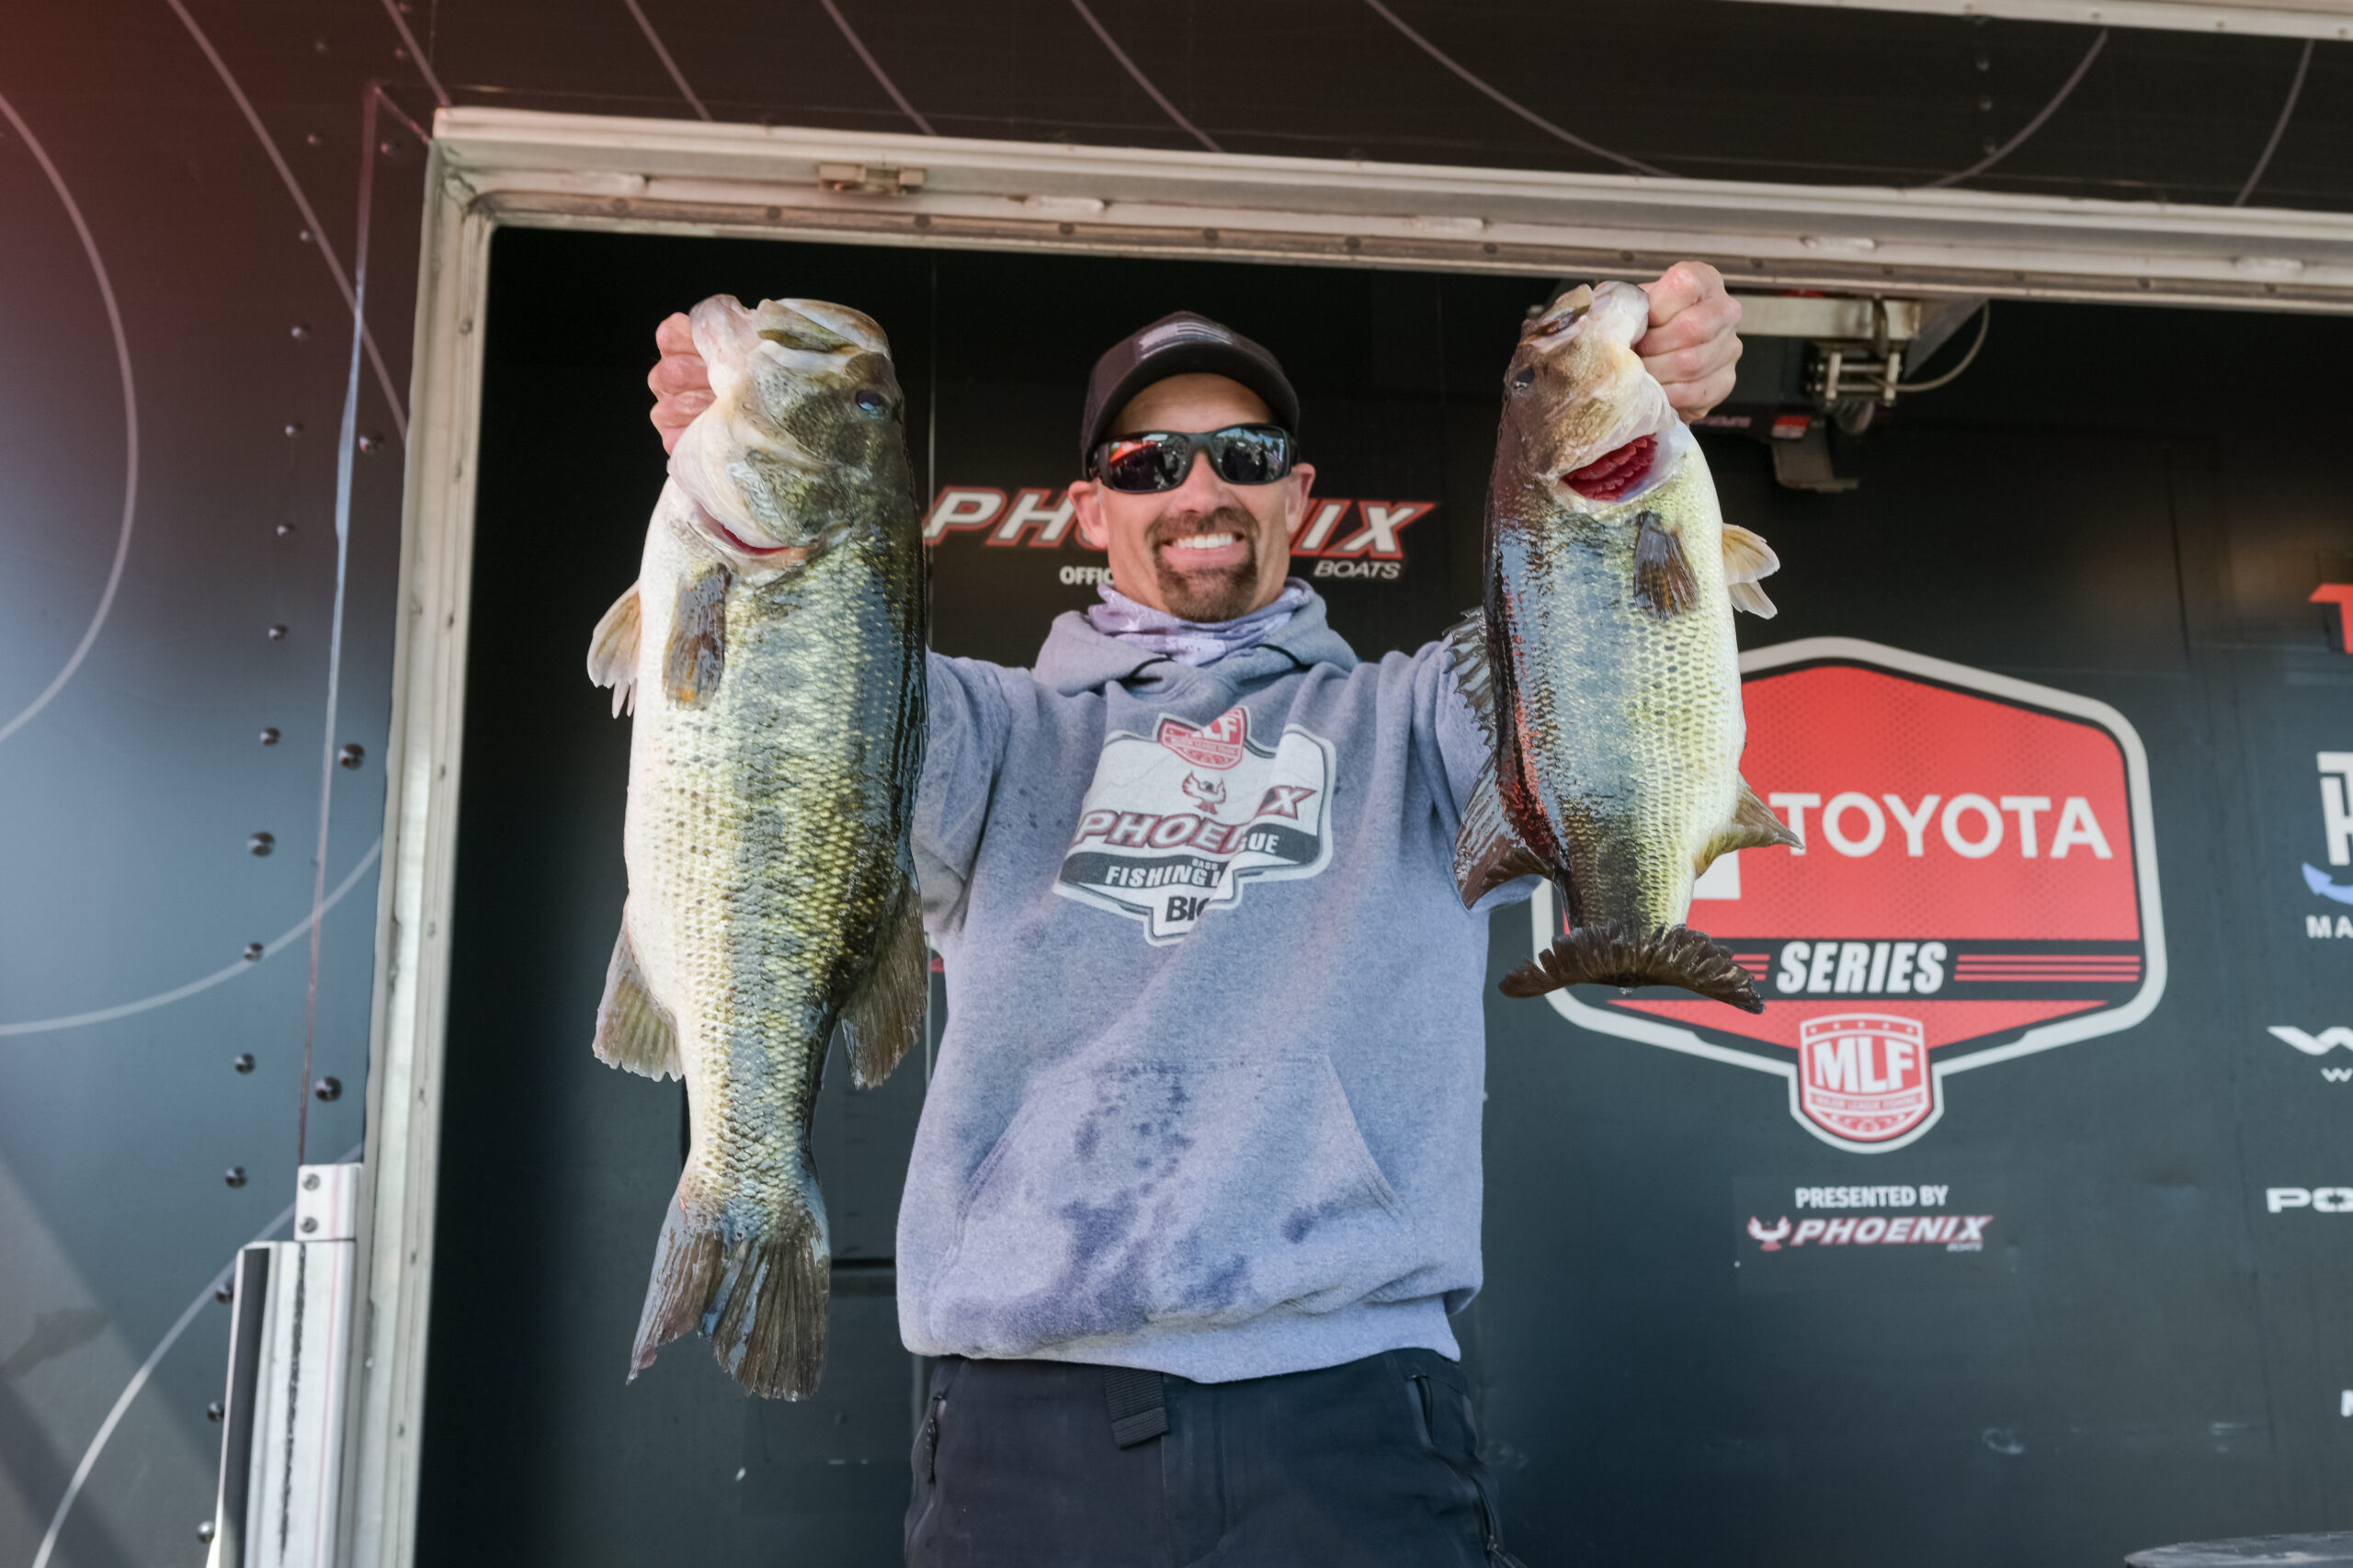 California Pro Todd Kline Earns Victory at MLF Toyota Series